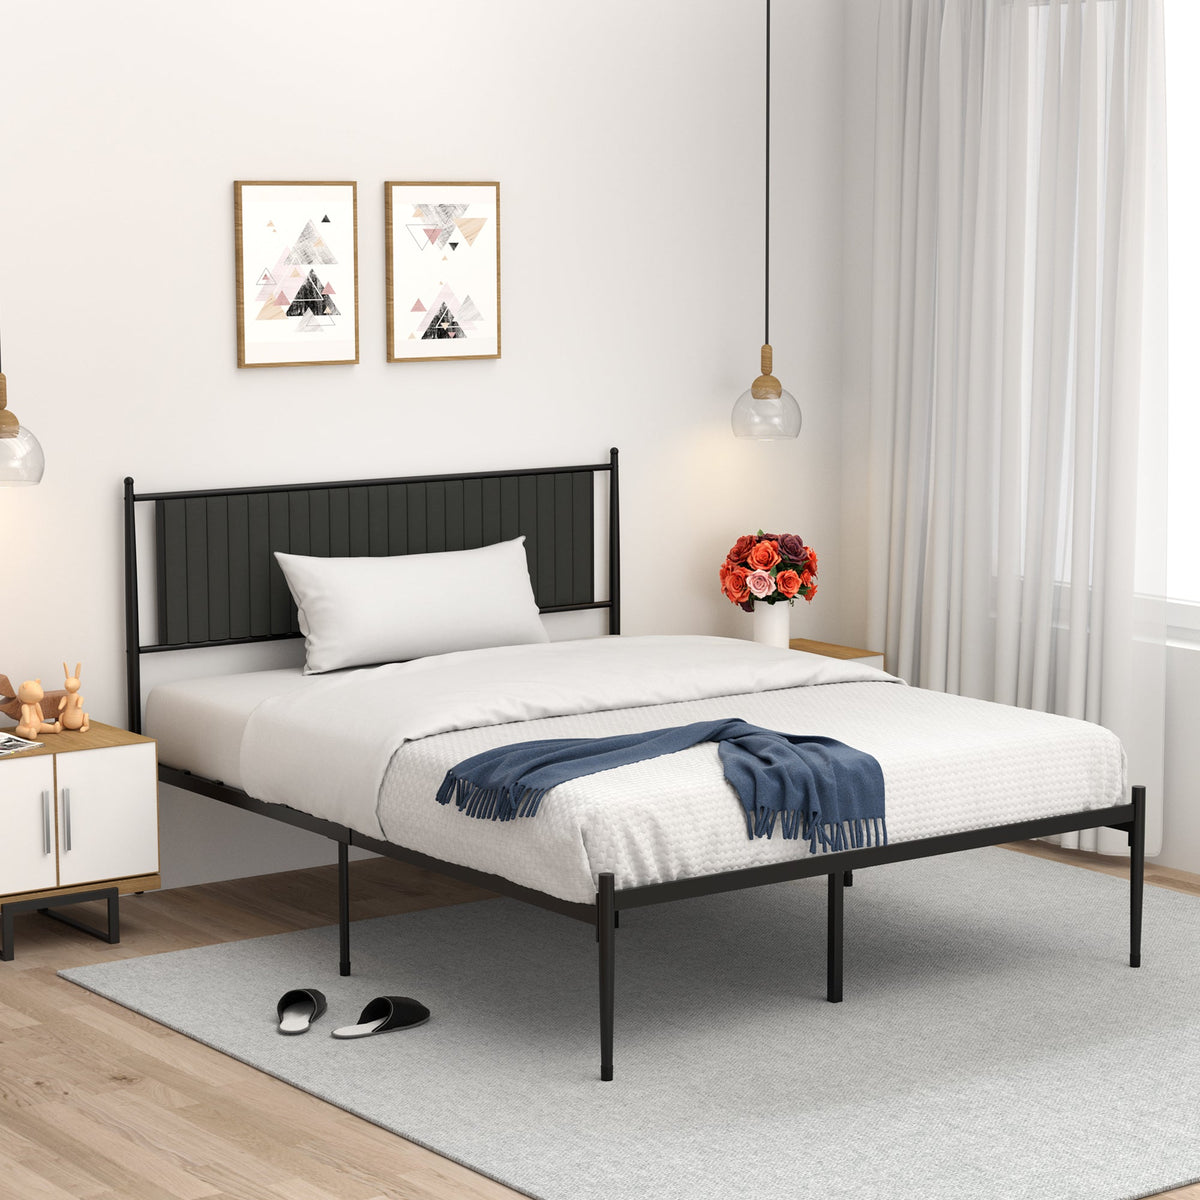 IDEALHOUSE Queen Size Metal Platform Bed Frame with Upholstered Headboard